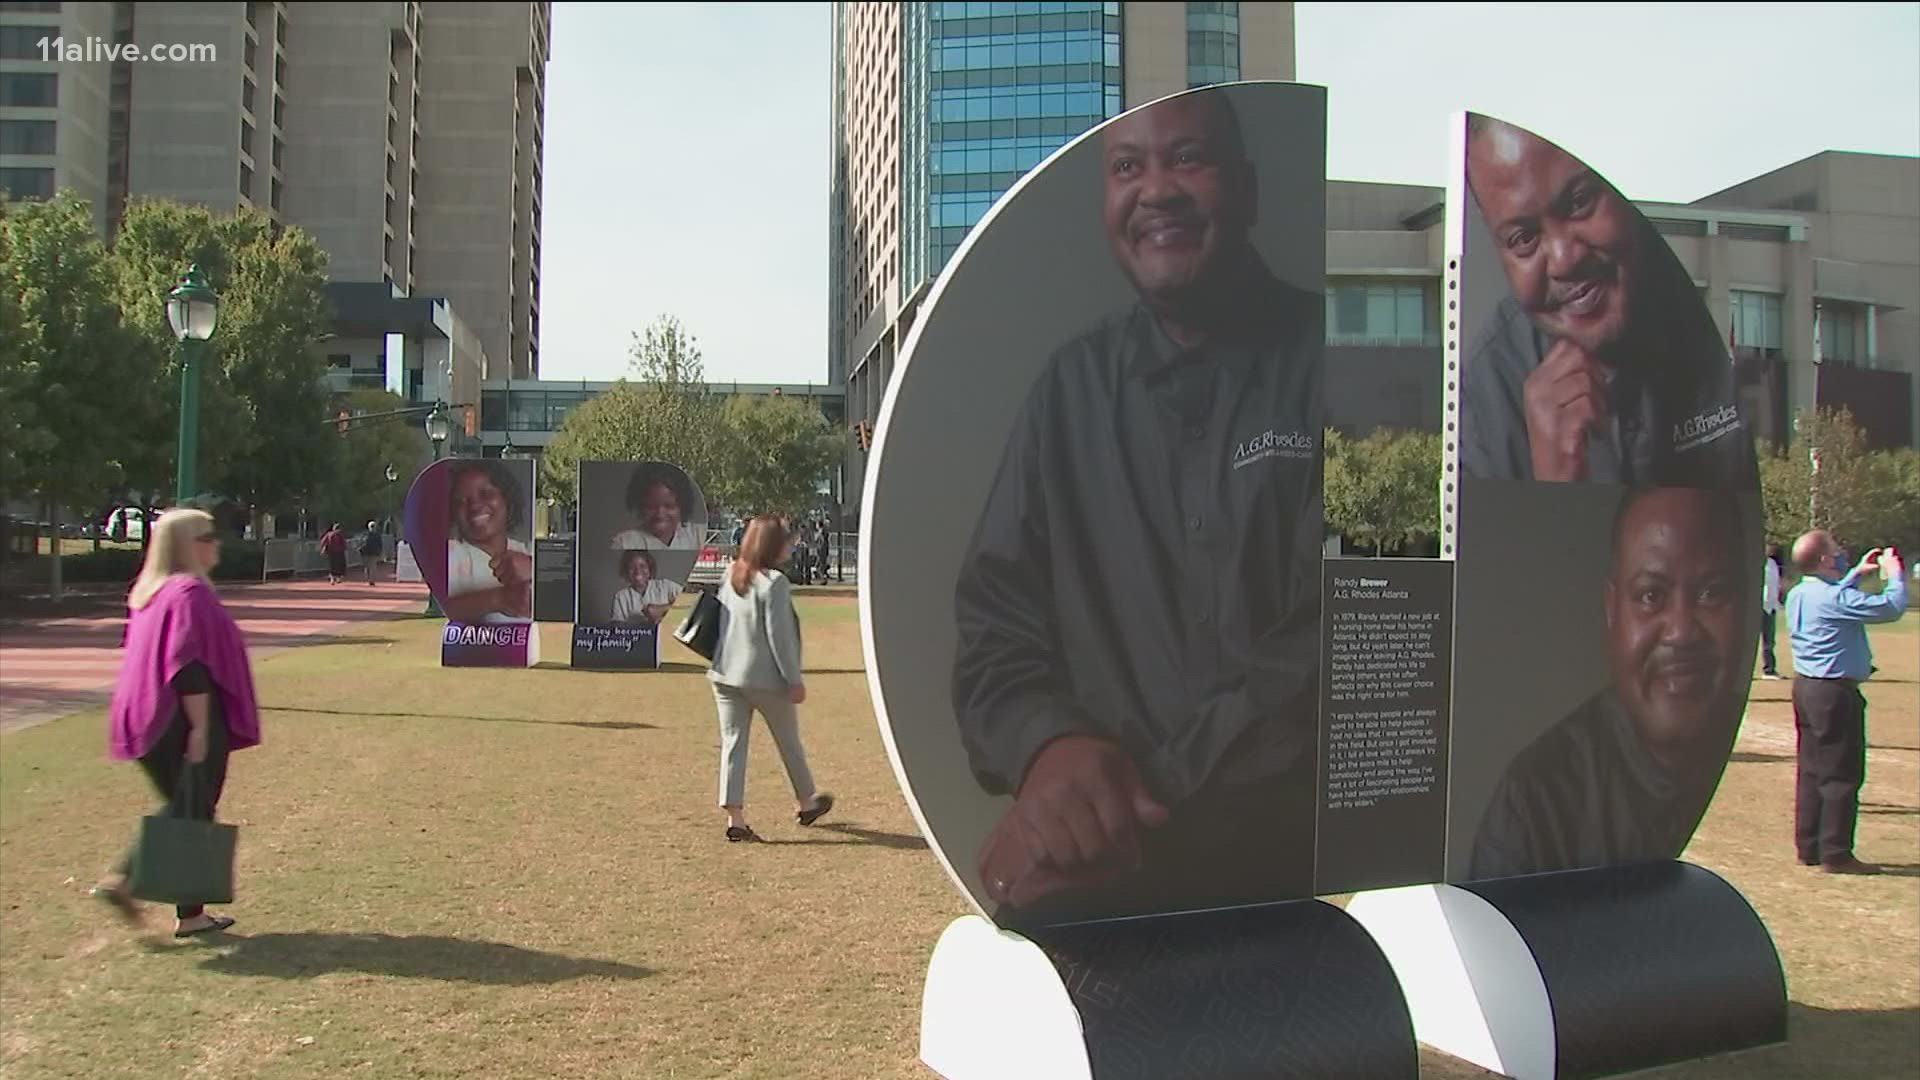 The full exhibit at Centennial Olympic Park is called "Joyful Hearts."